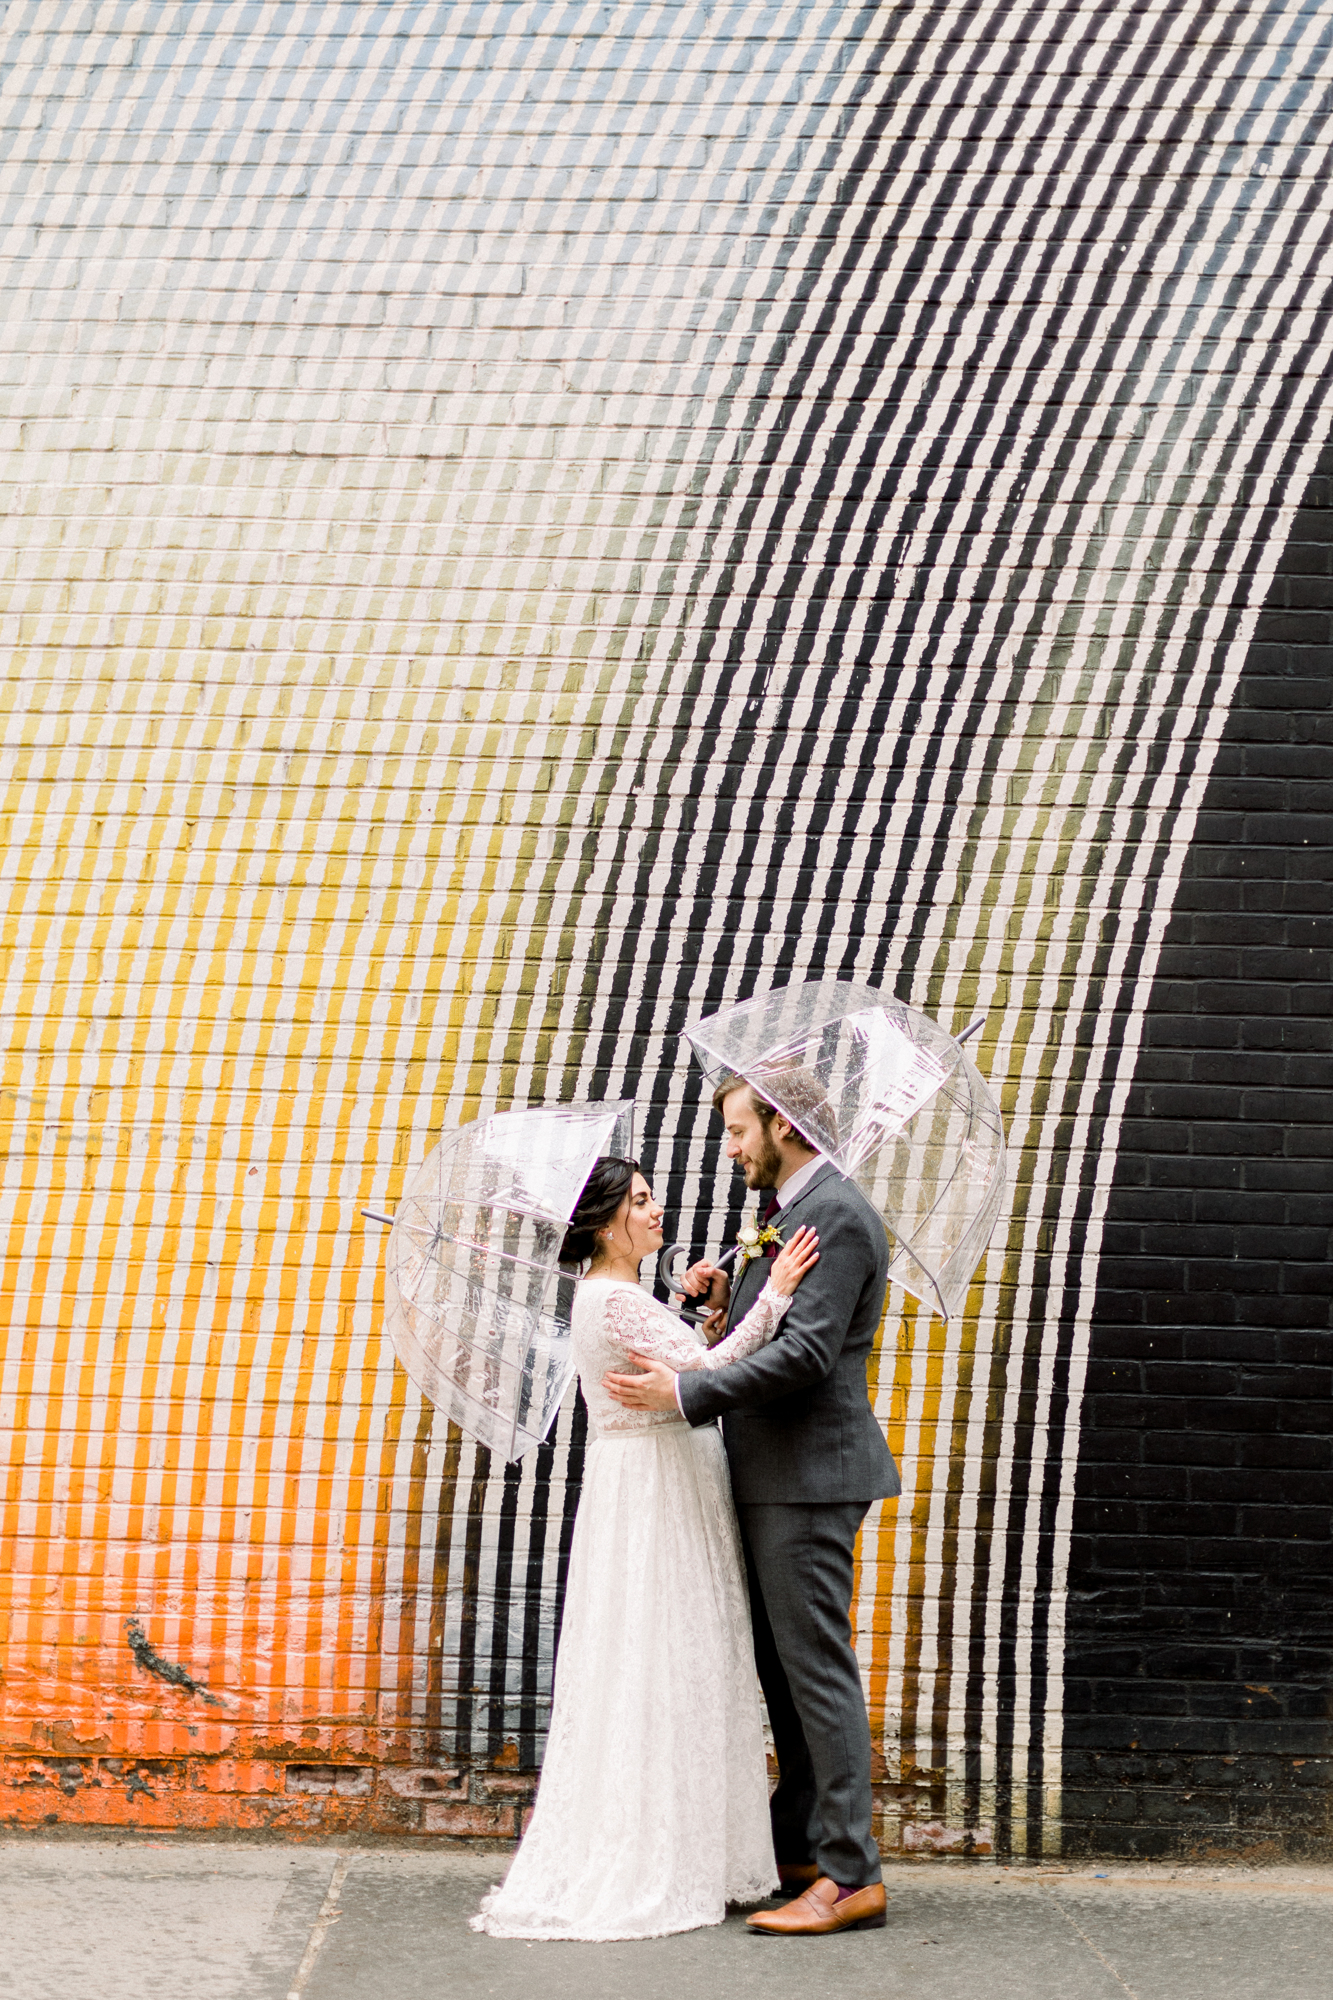 Intimate Elopement Photos in NYC